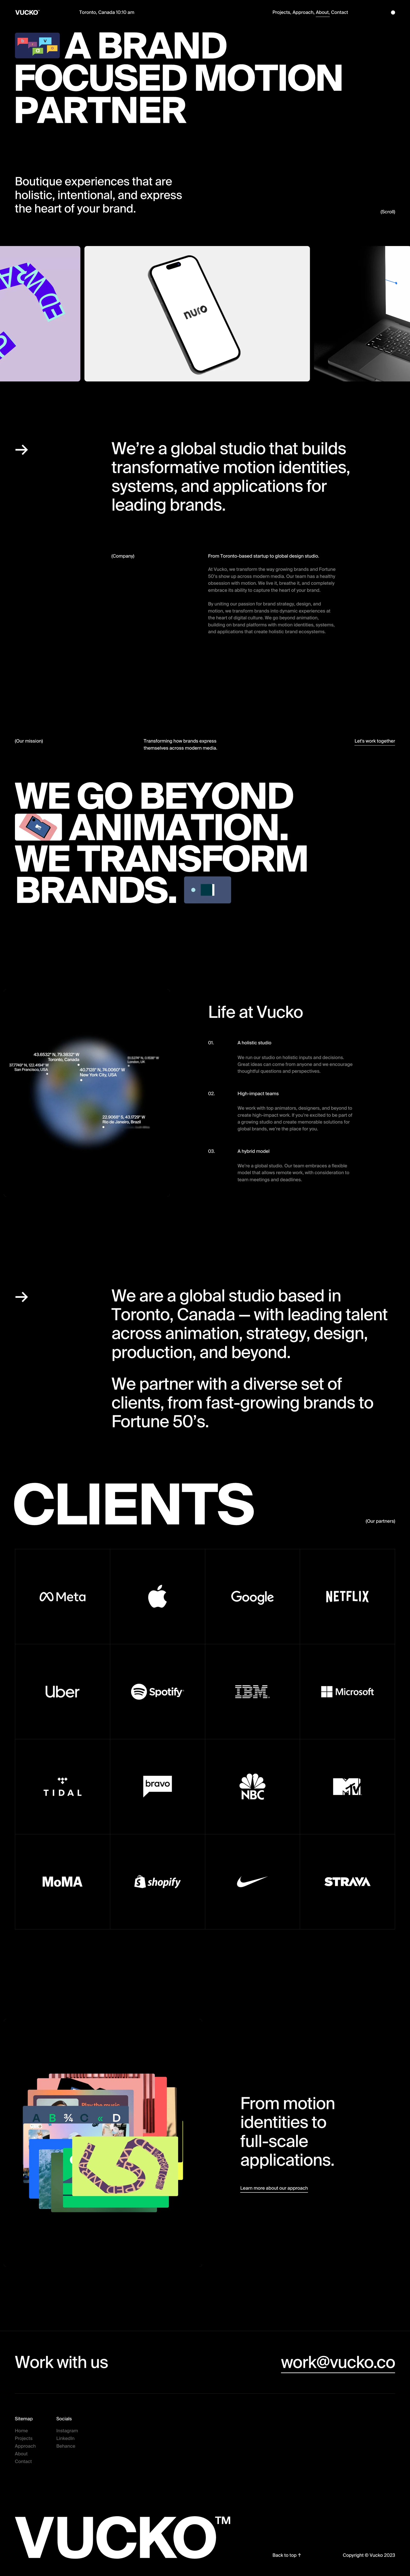 Vucko Landing Page Example: A motion partner building brand-led identities, systems, and applications.